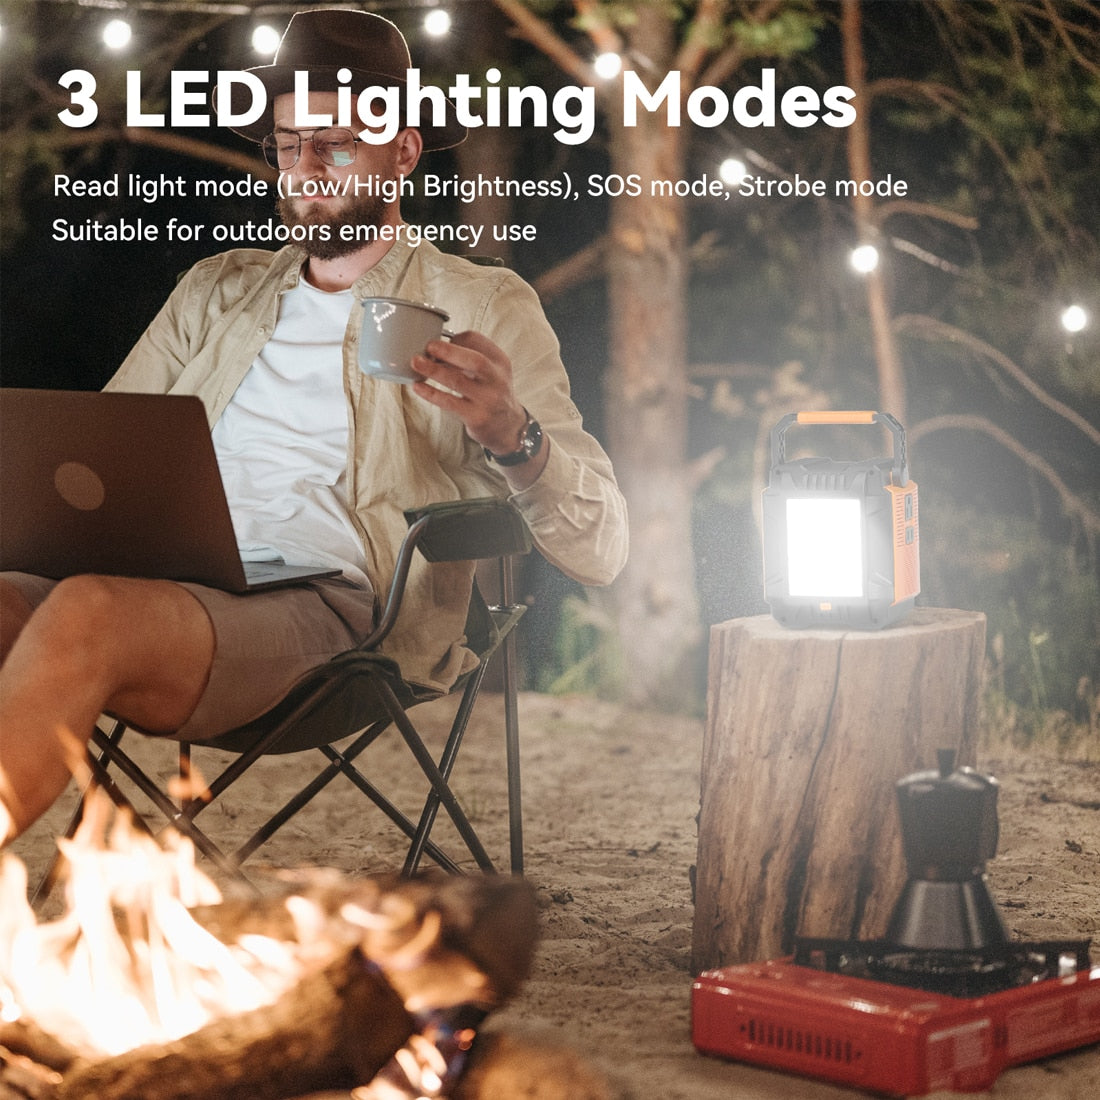 3 LED Lighting Modes Read light mode (Low/High Bright